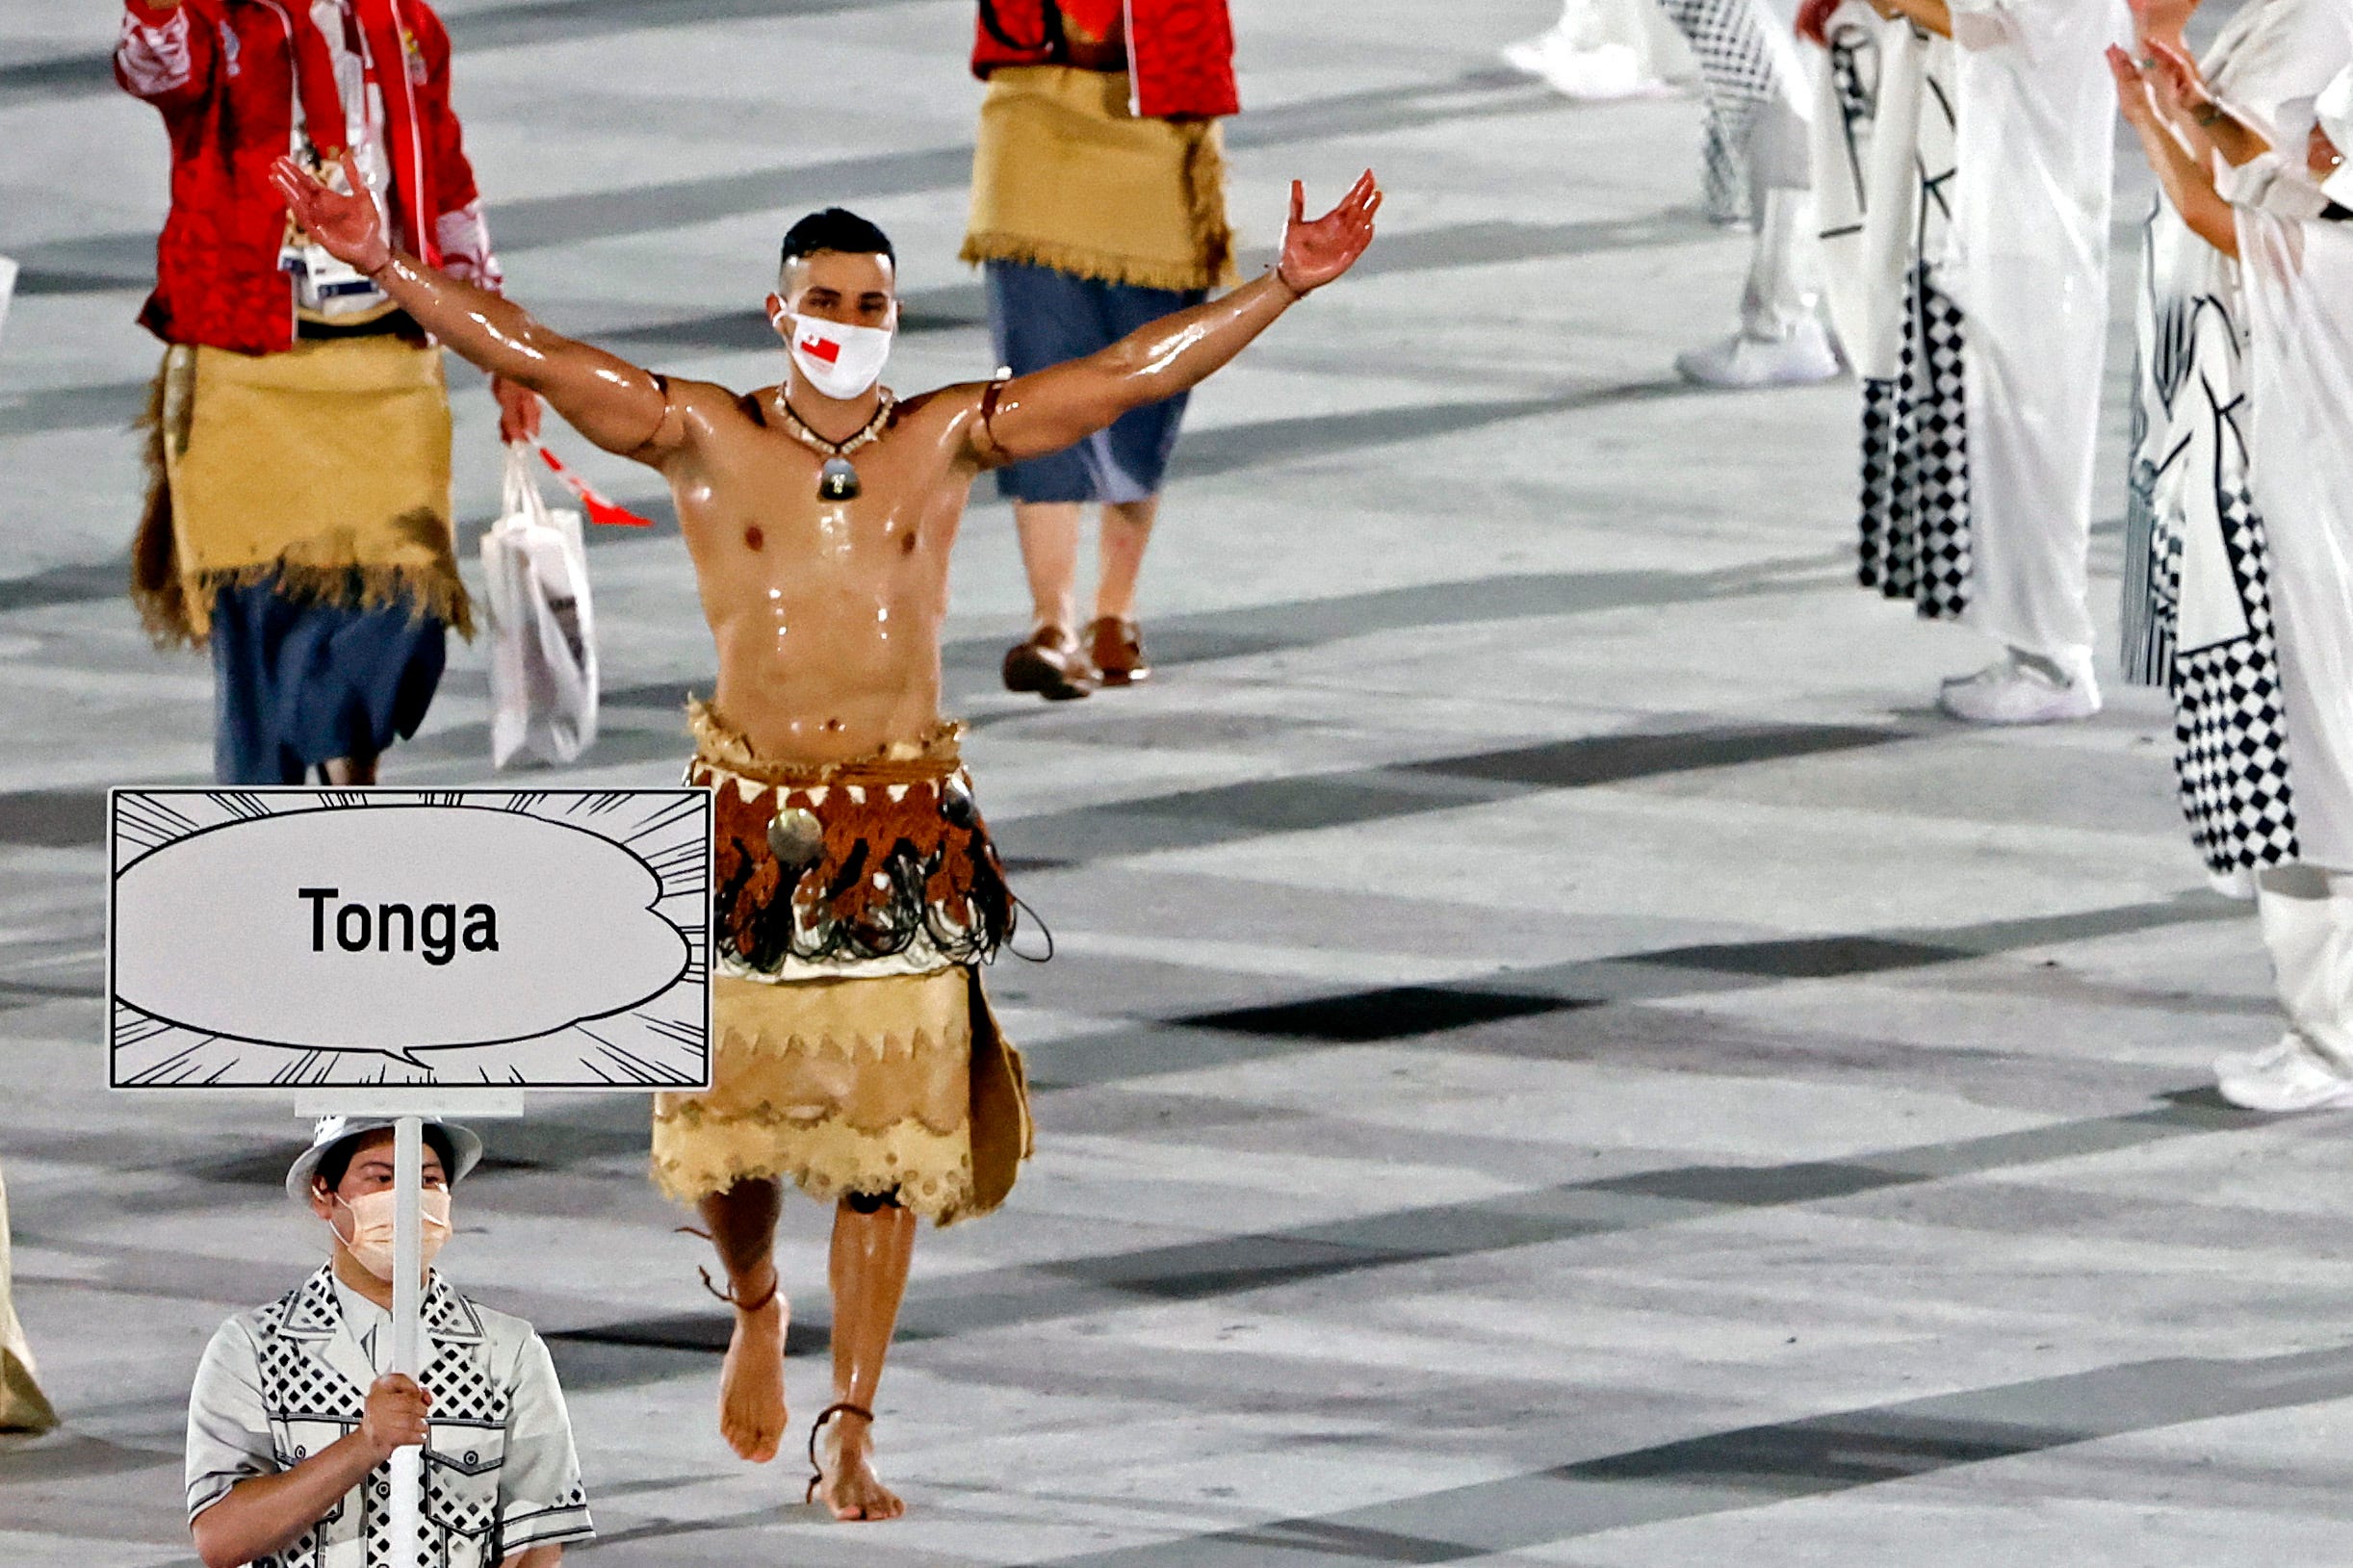 Two shirtless flag bearers for Olympic opening ceremony: Oiled-up Tongan joined by Vanuatu rower